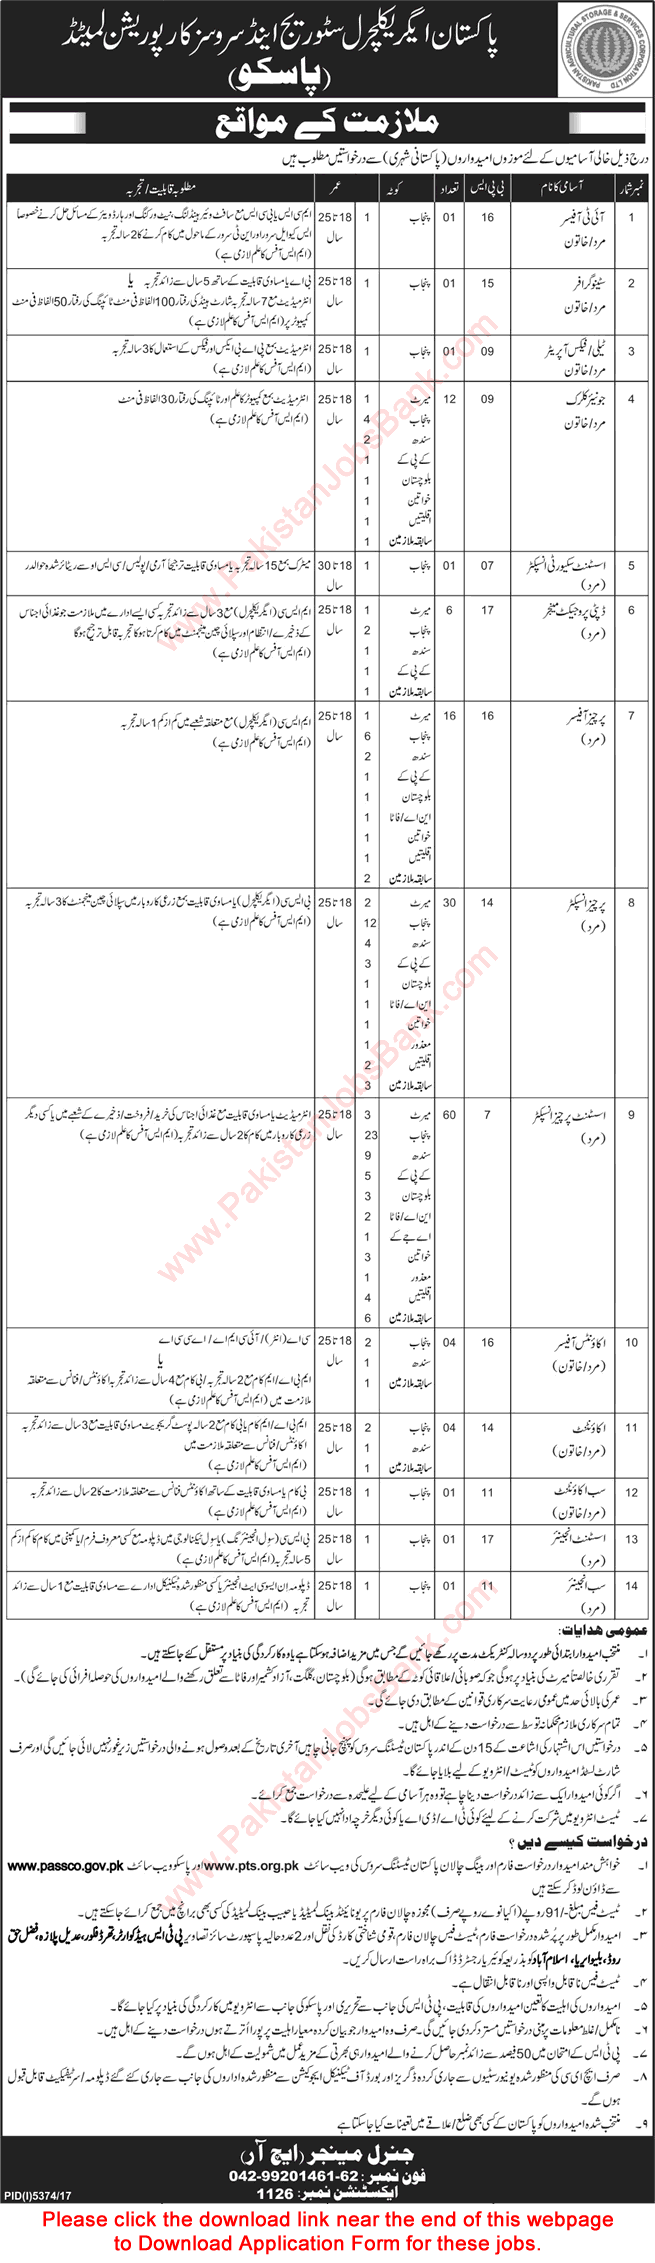 PASSCO Jobs 2018 April PTS Application Form Pakistan Agricultural Storage and Services Corporation Latest